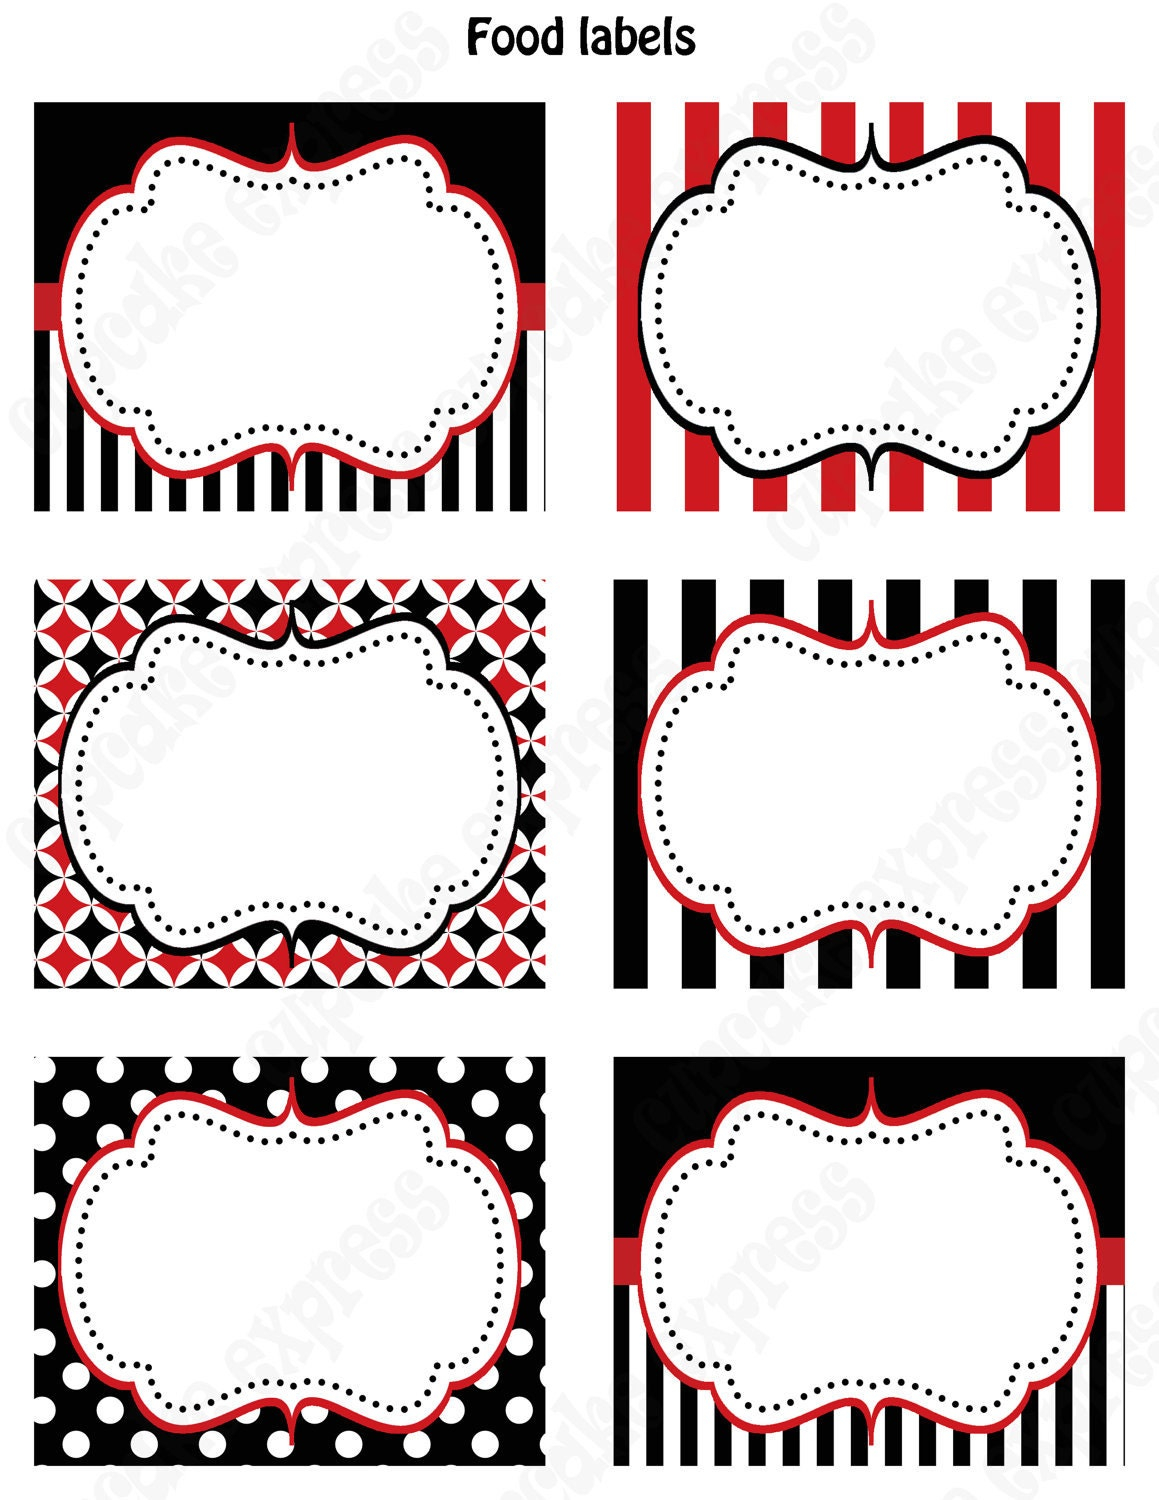 pirate-birthday-party-printable-food-labels-favor-tags-red-label